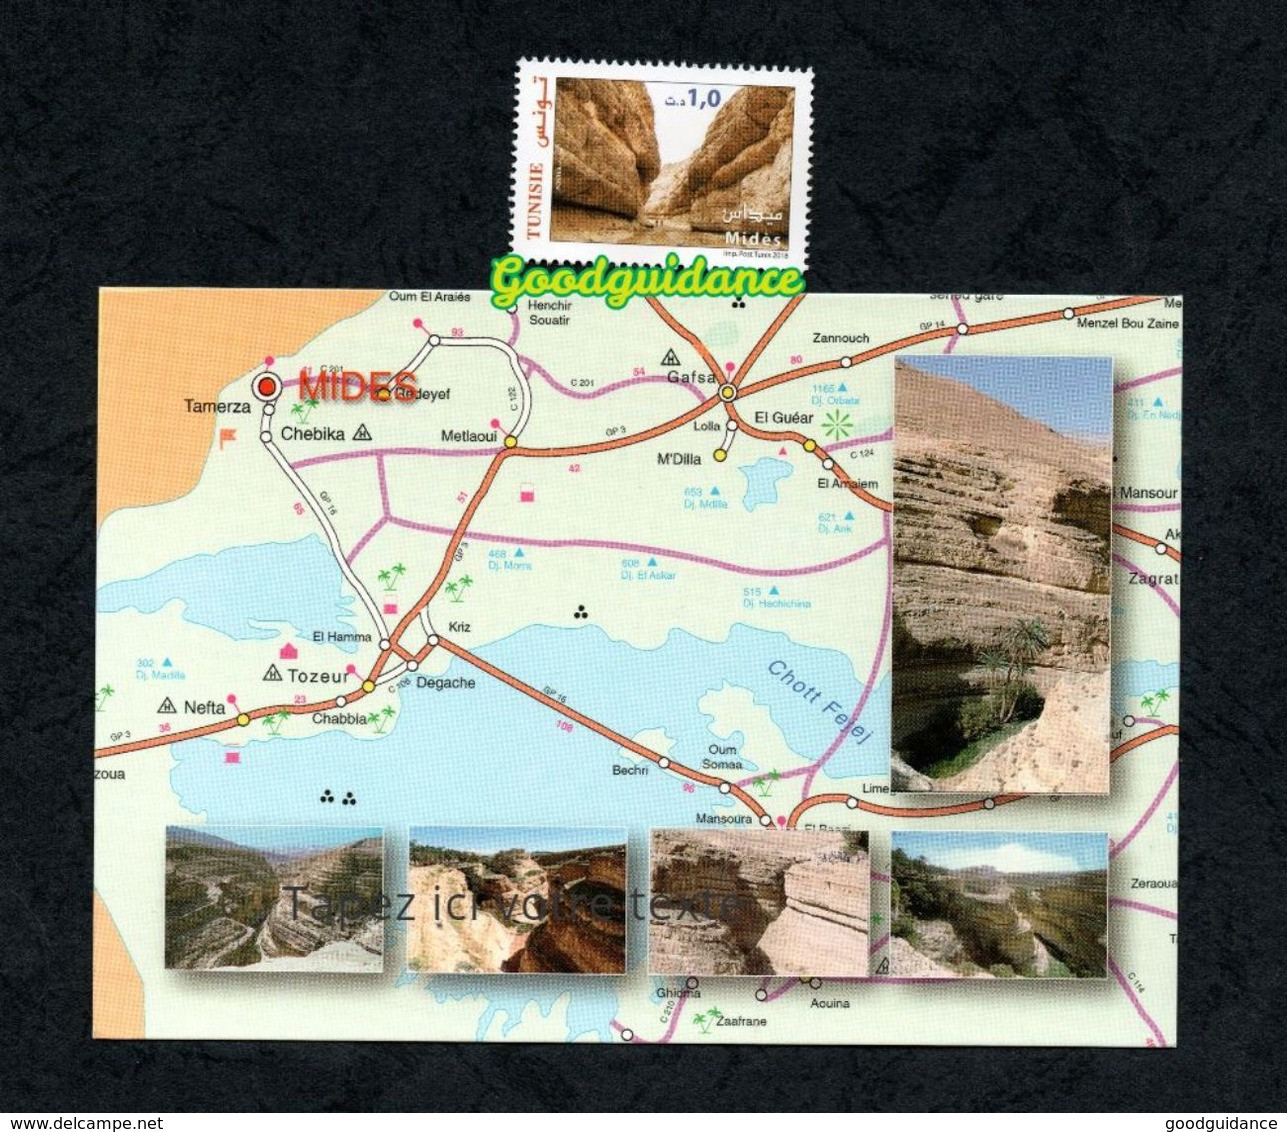 2018- Tunisia- Touristic And Archaeological Sites In Tunisia- Mides Postcard And Stamp MNH** - Archeologia